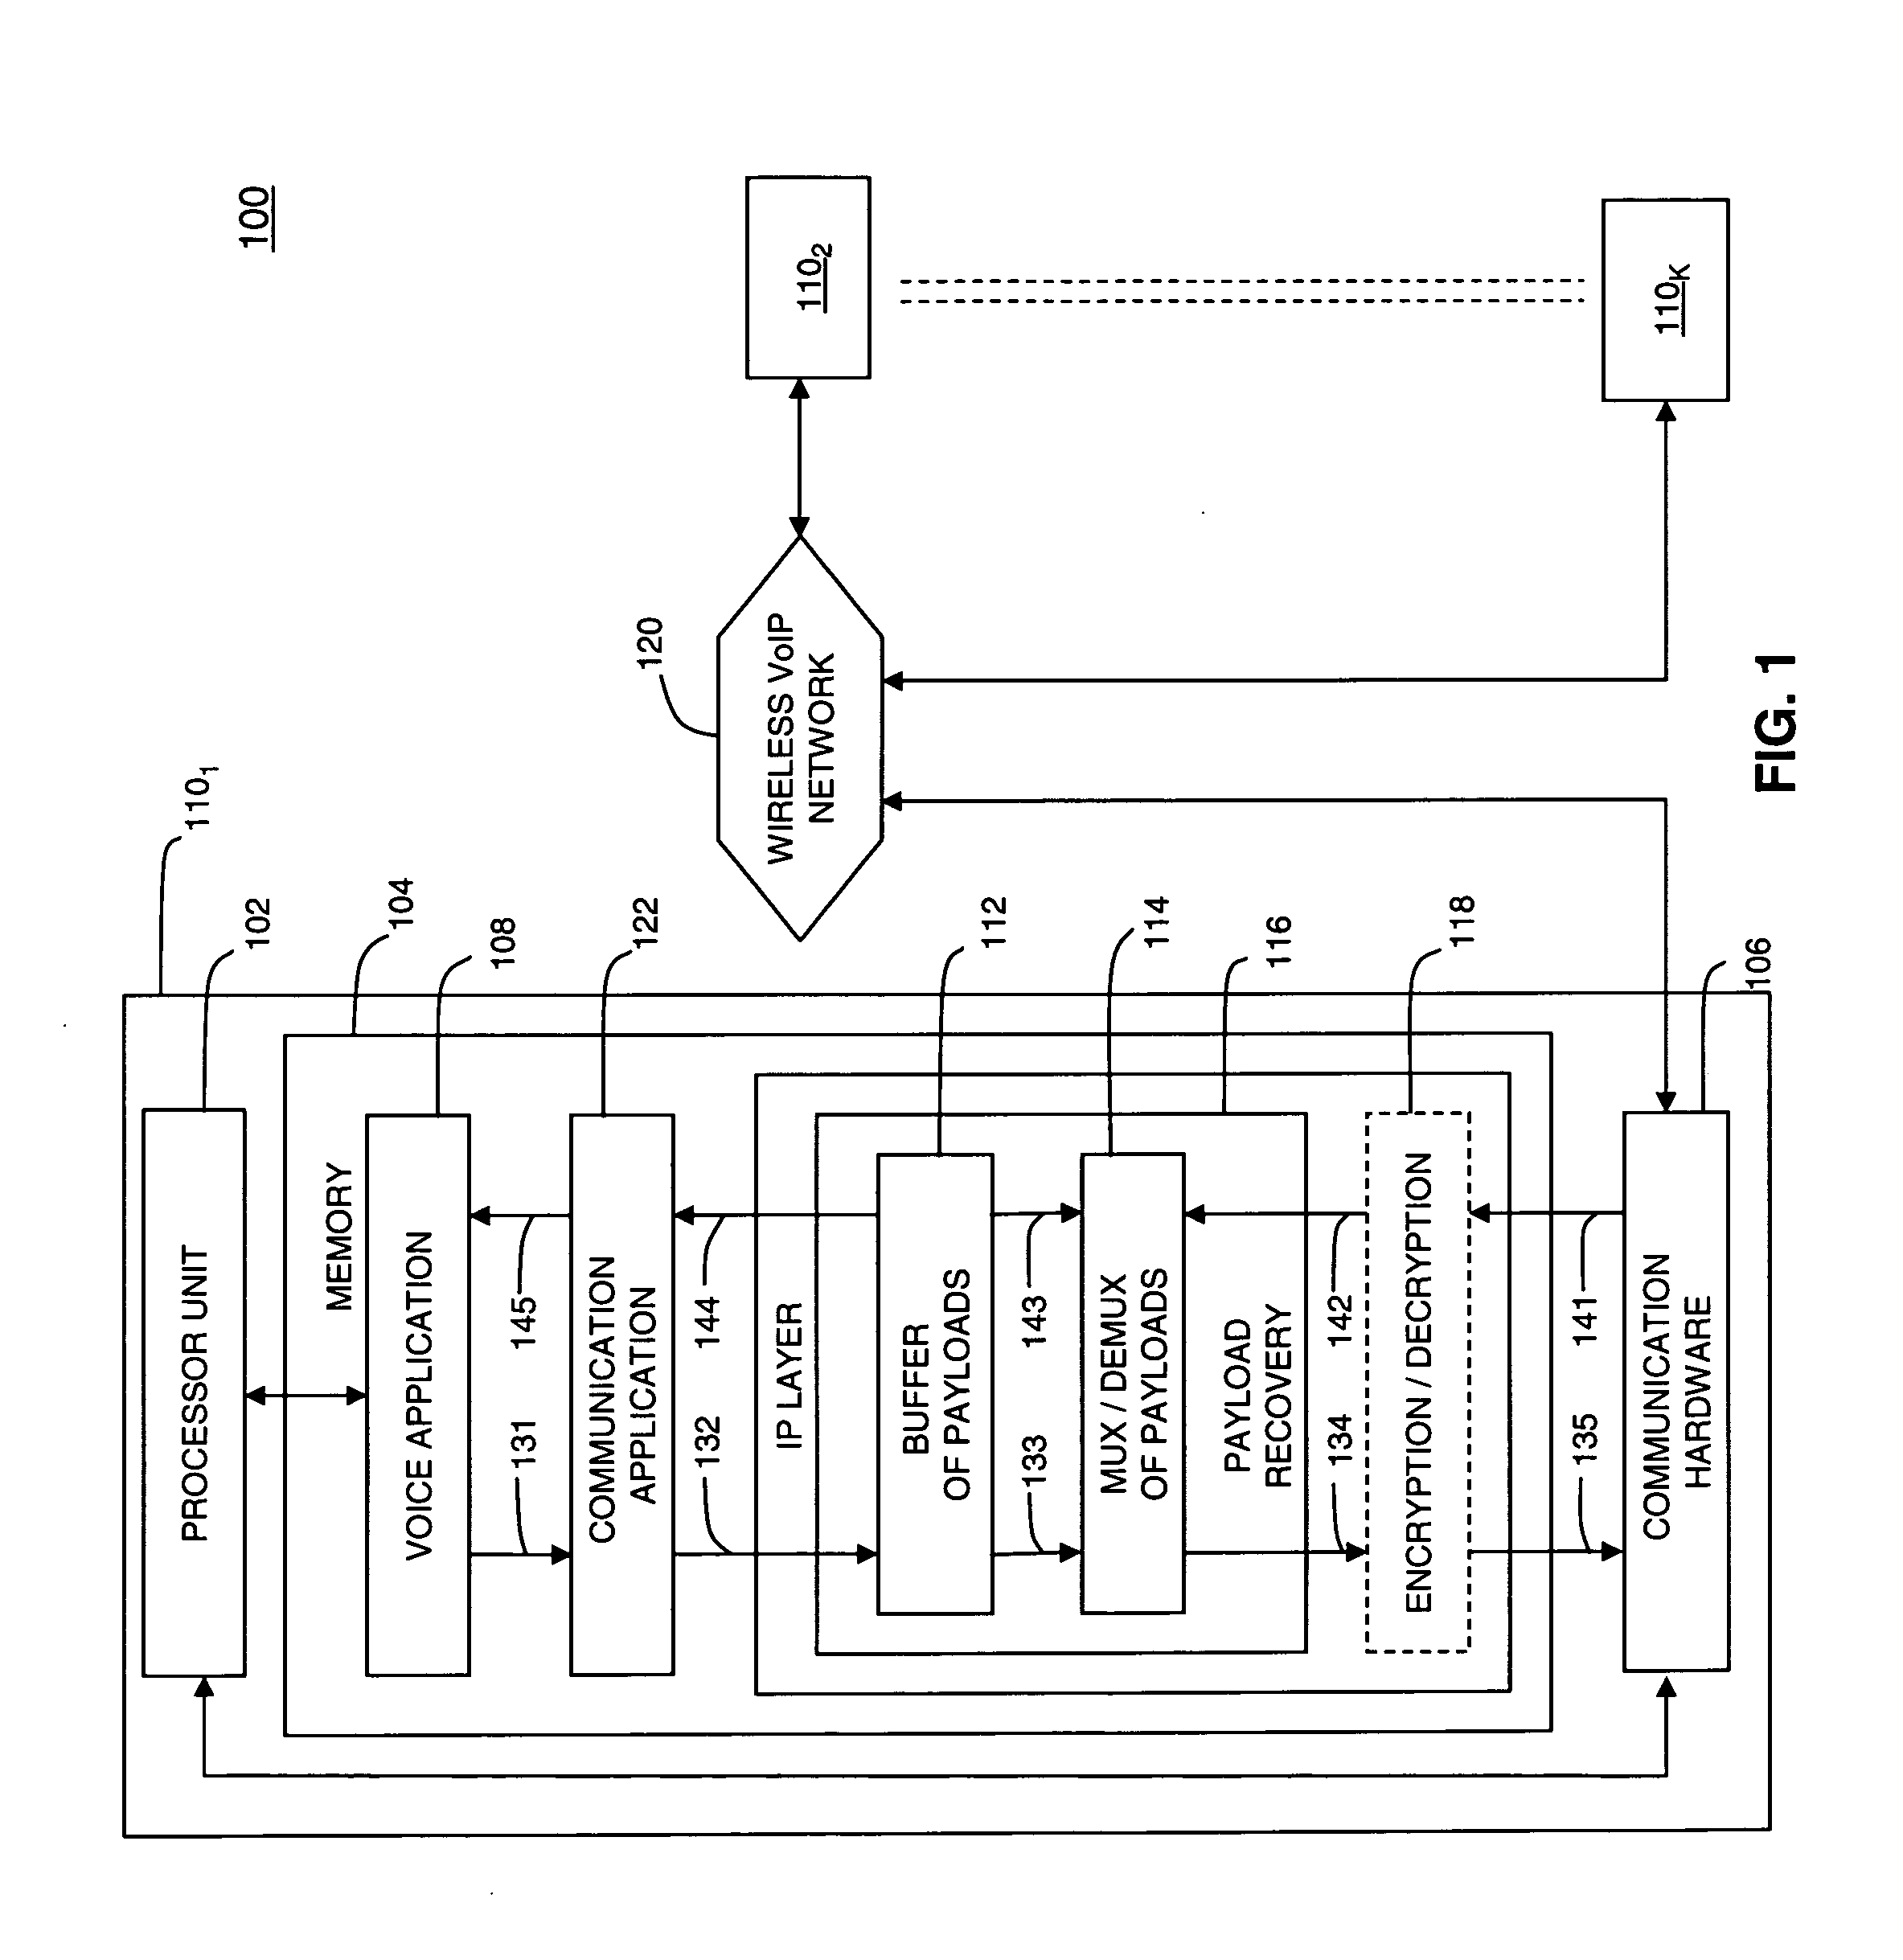 Method and system for wireless VoIP communications